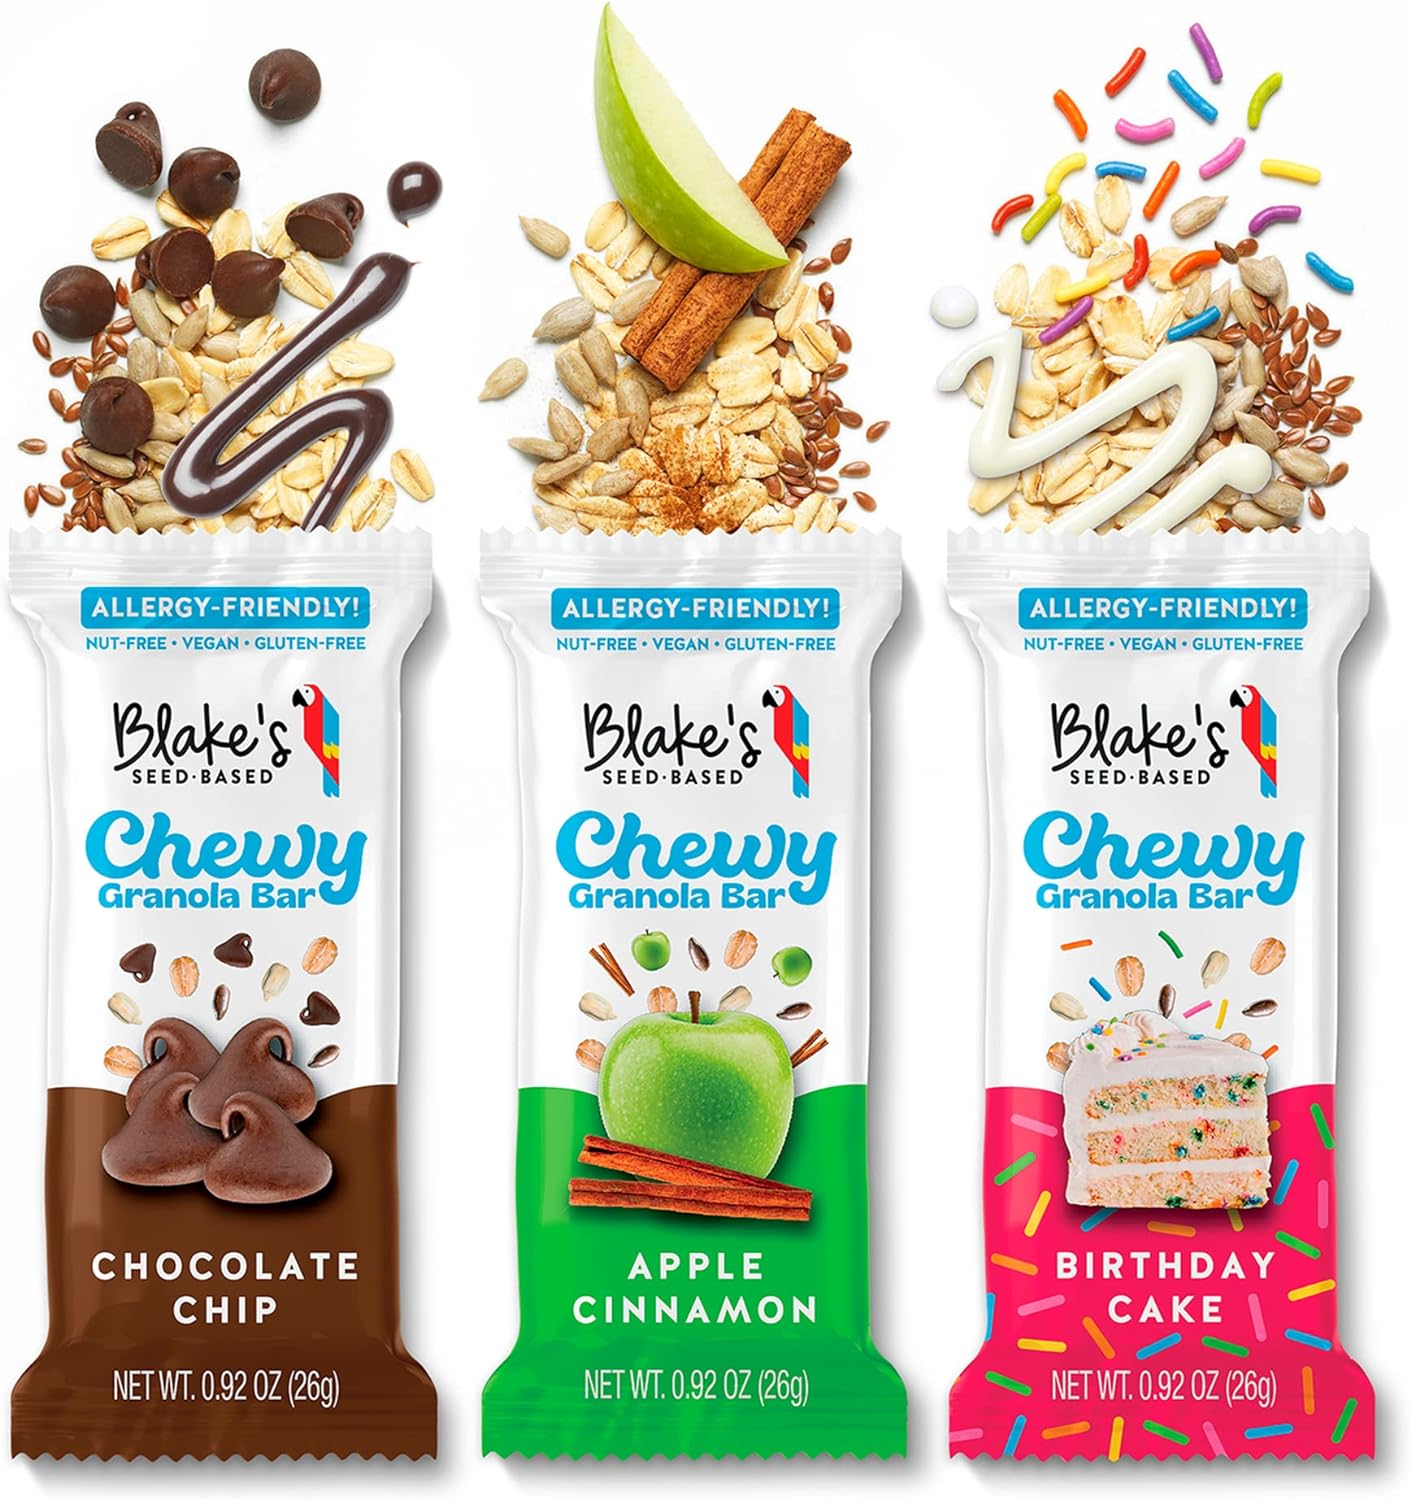 Blake’s Seed Based Chewy Granola Bars — Chocolate Chip (5 Count), Vegan, Gluten Free, Nut Free & Dairy Free, Healthy Snacks for Kids or Adults, School Safe, Low Calorie Soy Free Snack